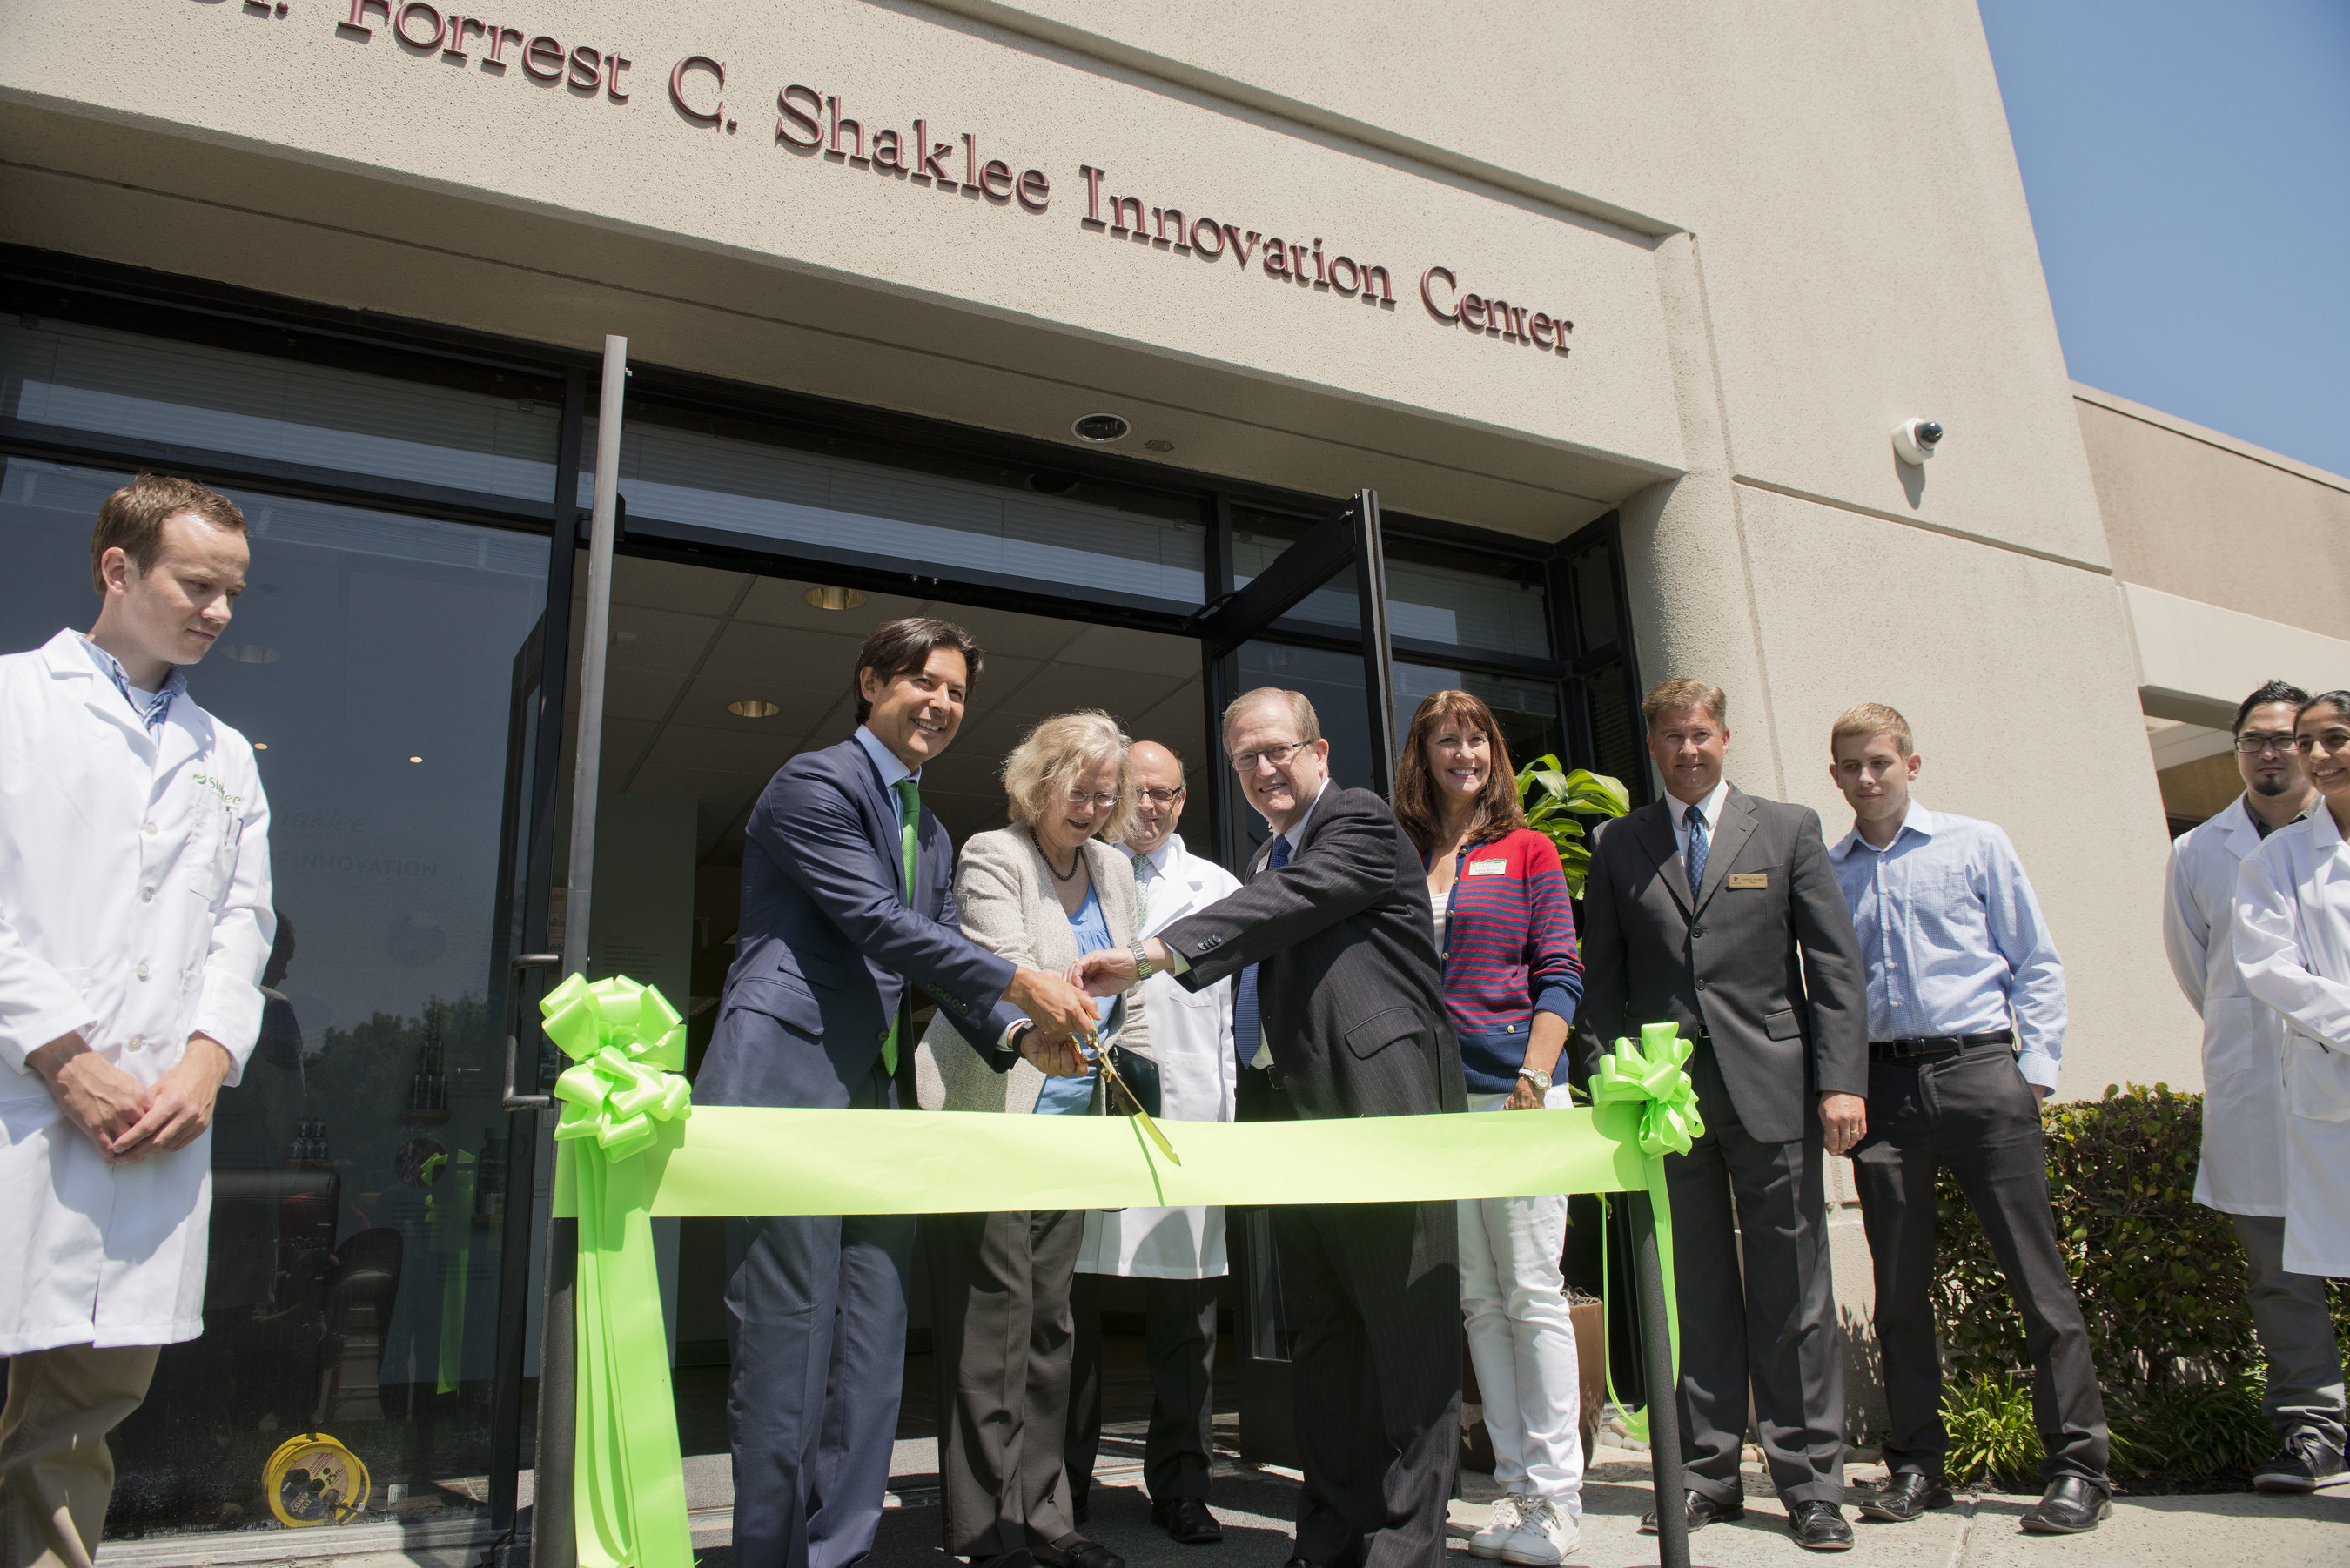 On Monday April 20, Shaklee Corporation, leader in natural health & wellness products  opened the Dr. Forrest C. Shaklee Global Innovation Center in Pleasanton, California, near Shaklee World Headquarters. The new innovation center houses the Shaklee Research and Development teams to create stronger and more impactful innovations in the field of nutritional science.